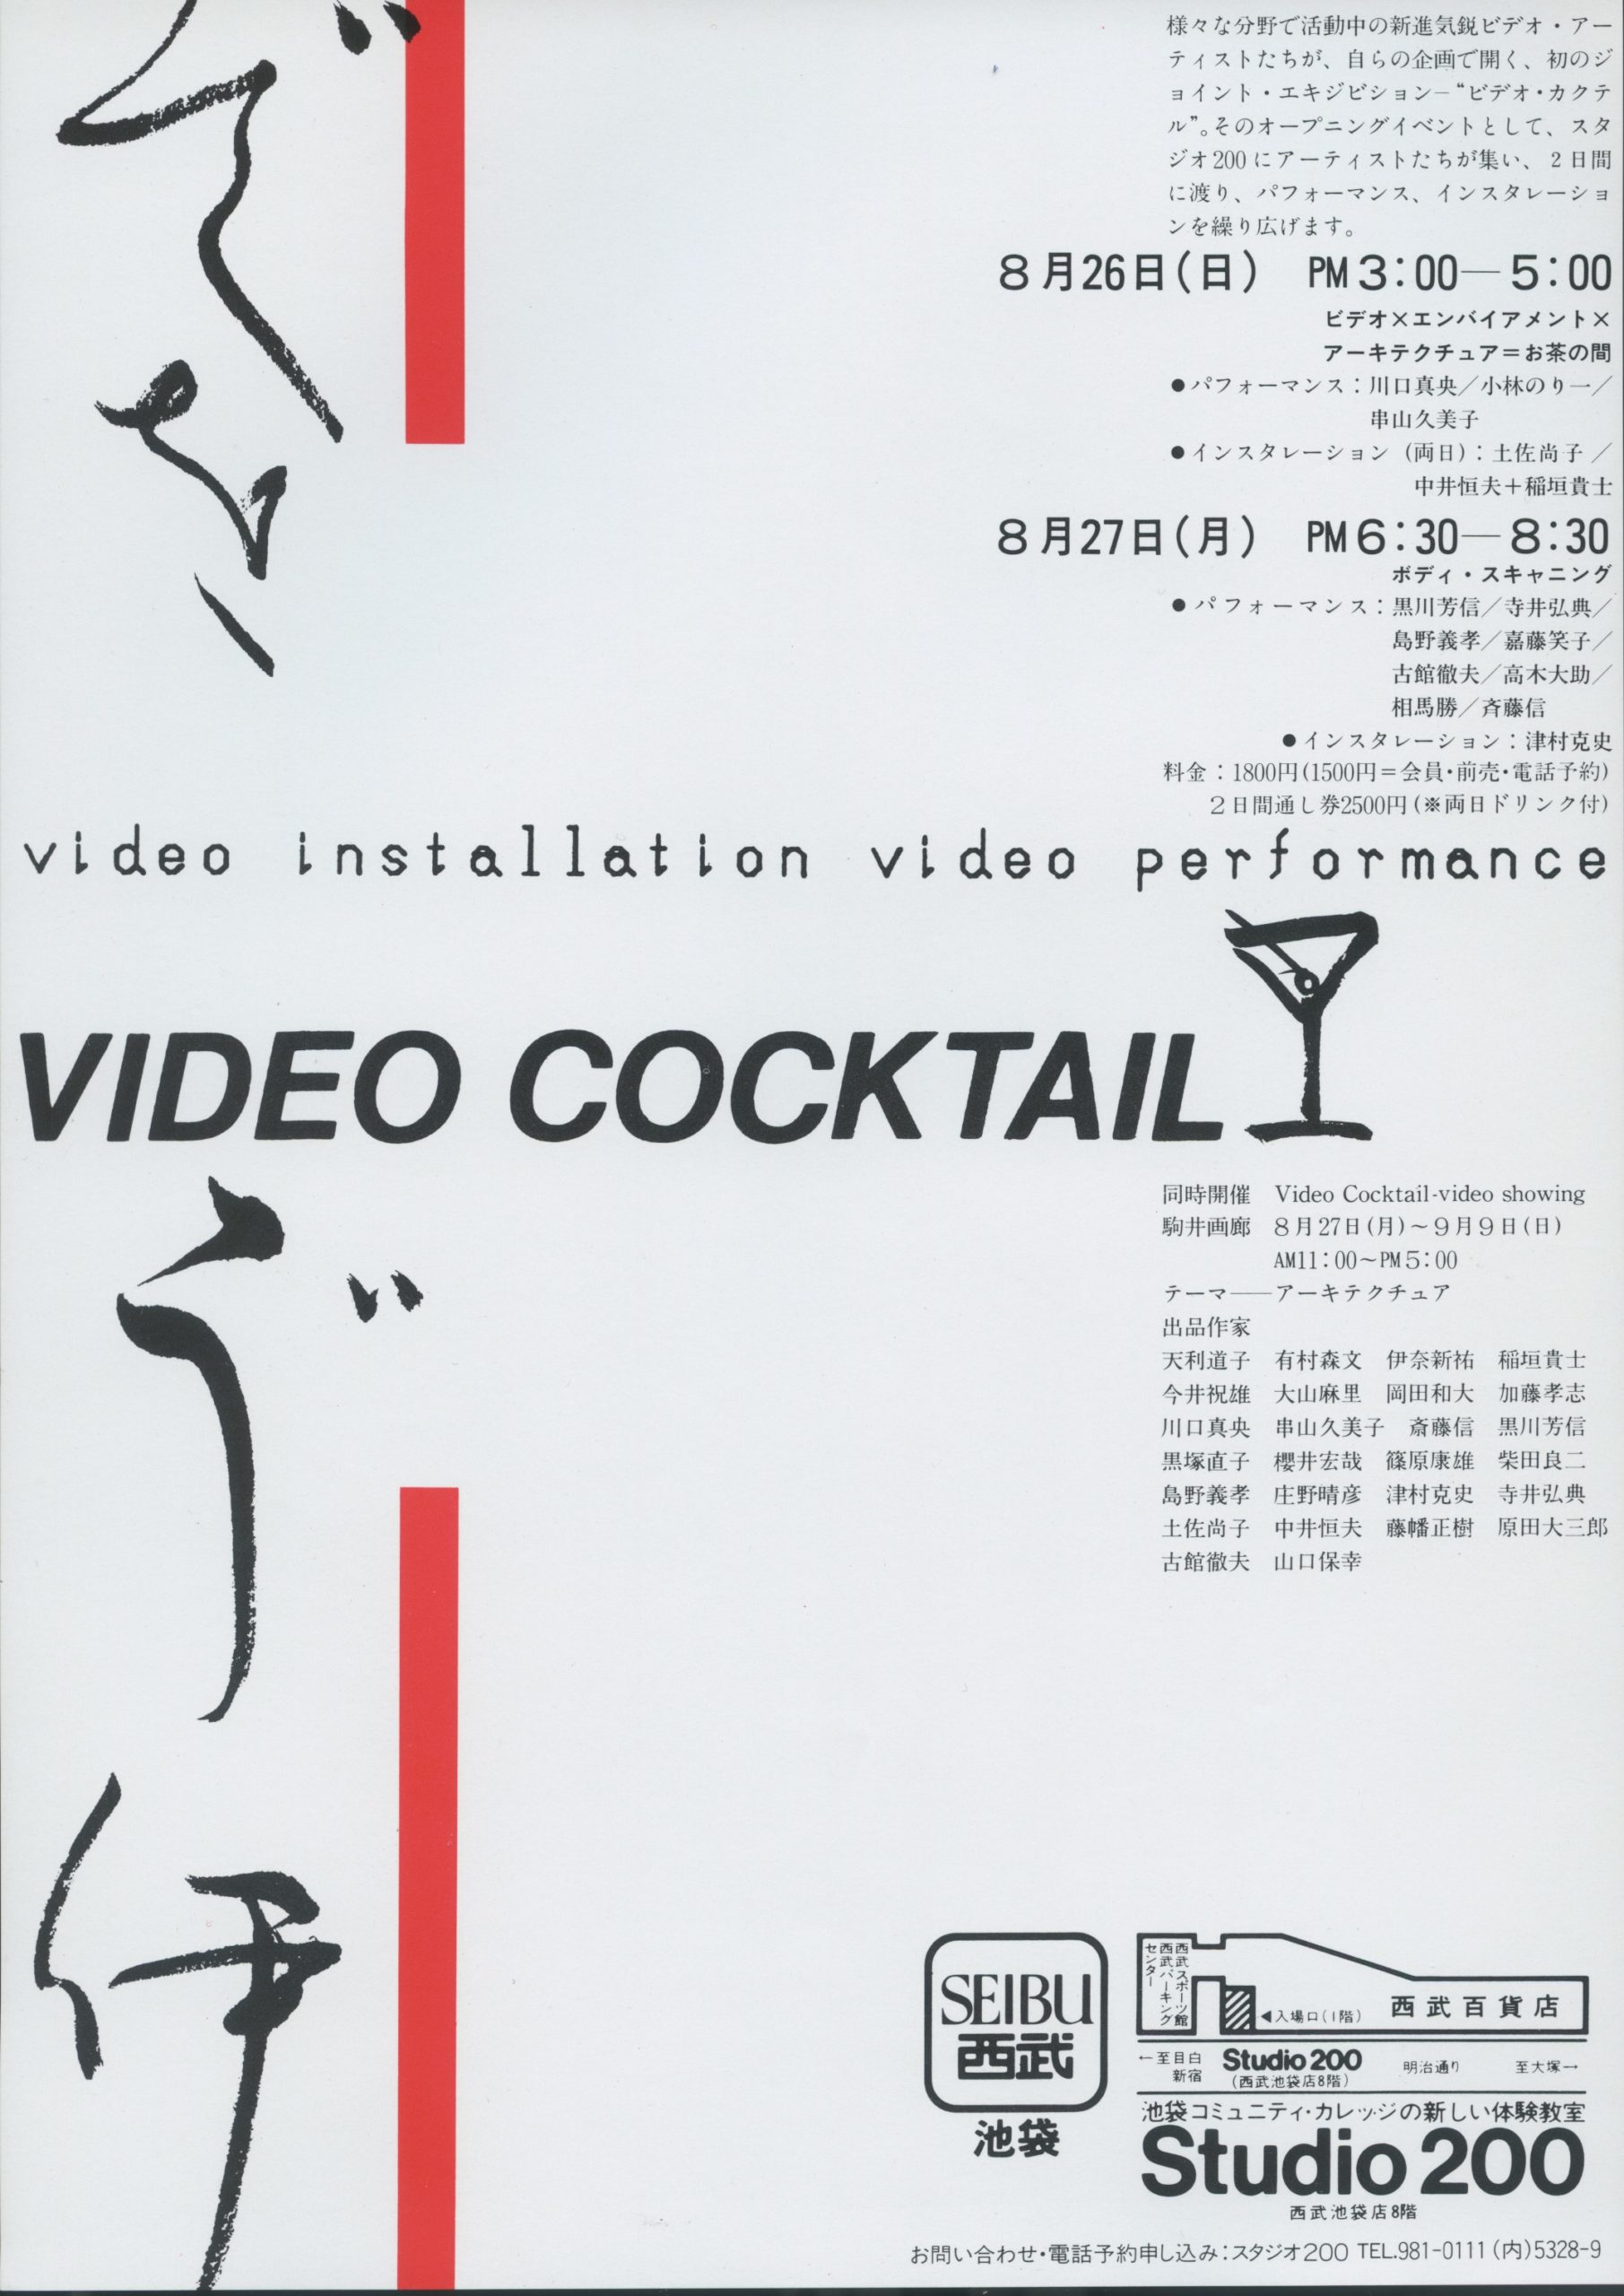 1984 VIDEO COCKTAIL